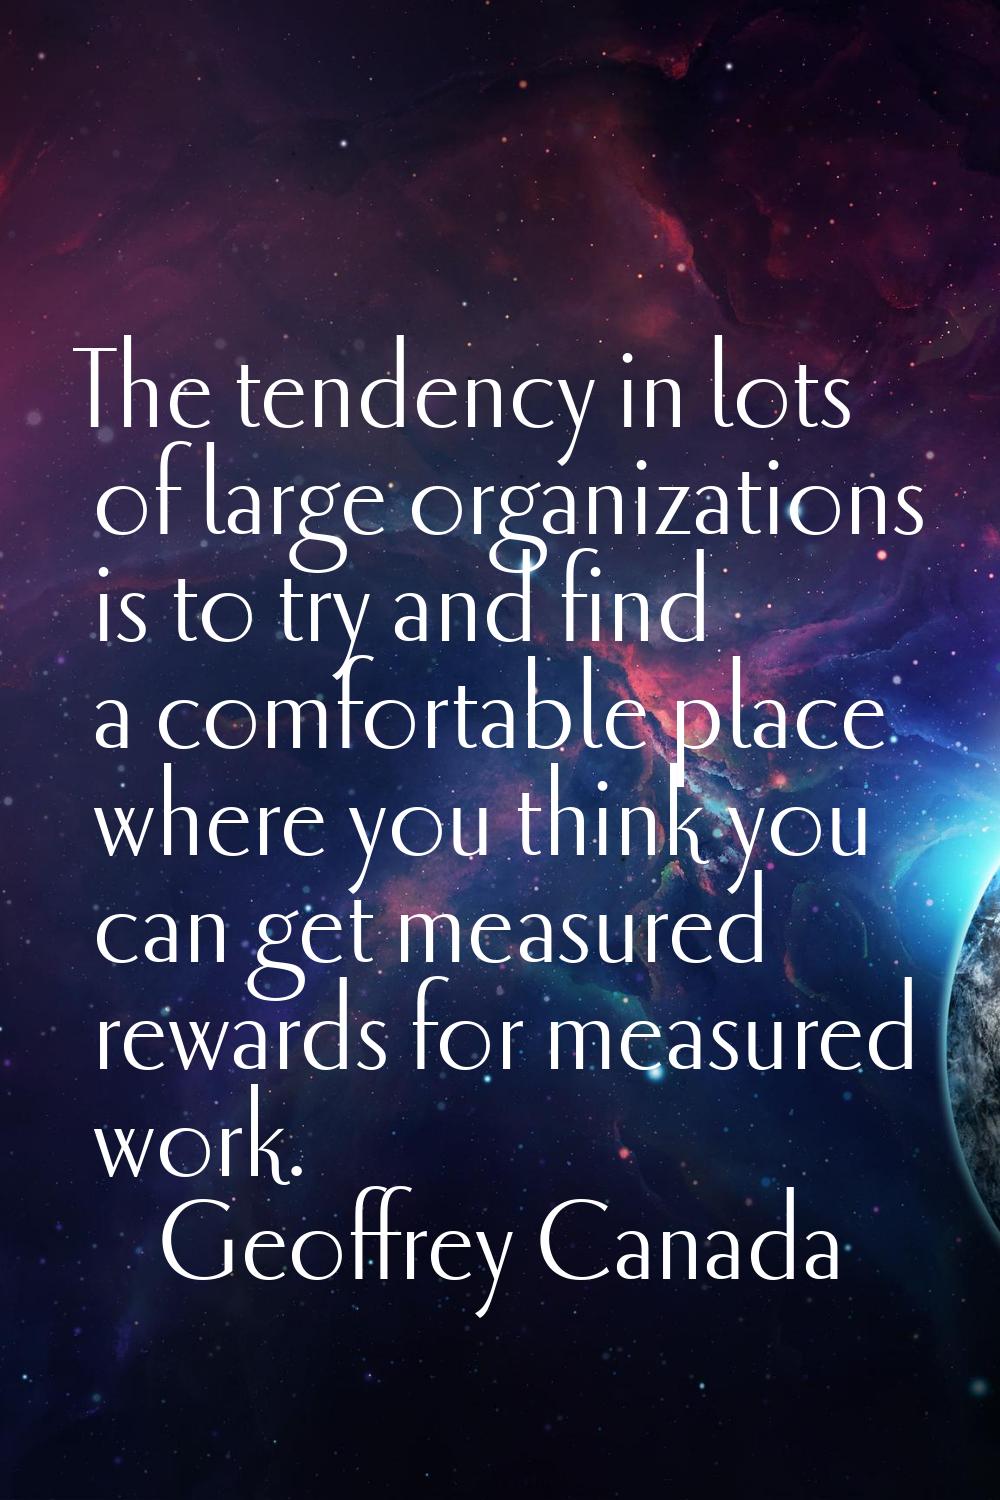 The tendency in lots of large organizations is to try and find a comfortable place where you think 